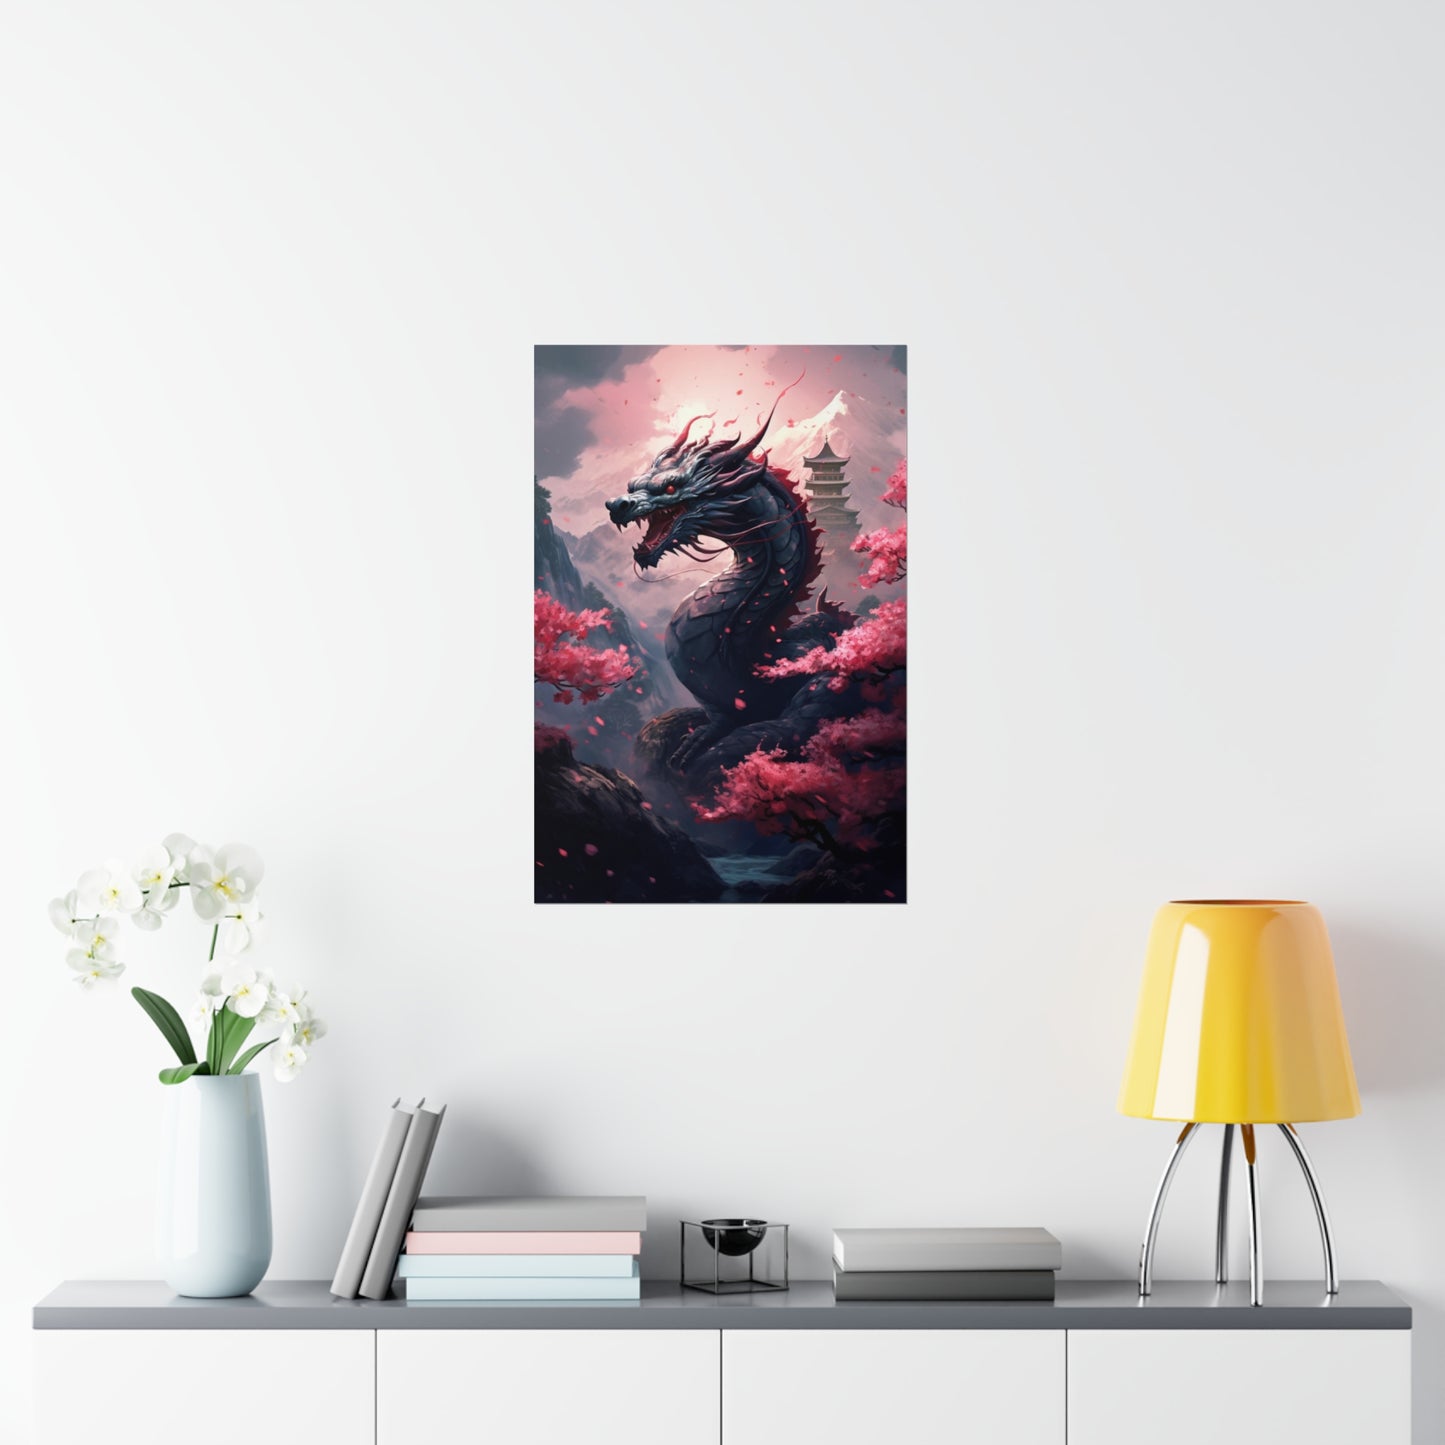 Japanese Dragon Poster Print, Cherry Blossom Picture Photo Wall Image Art Vertical Paper Artwork Small Large Cool Room Office Decor Starcove Fashion